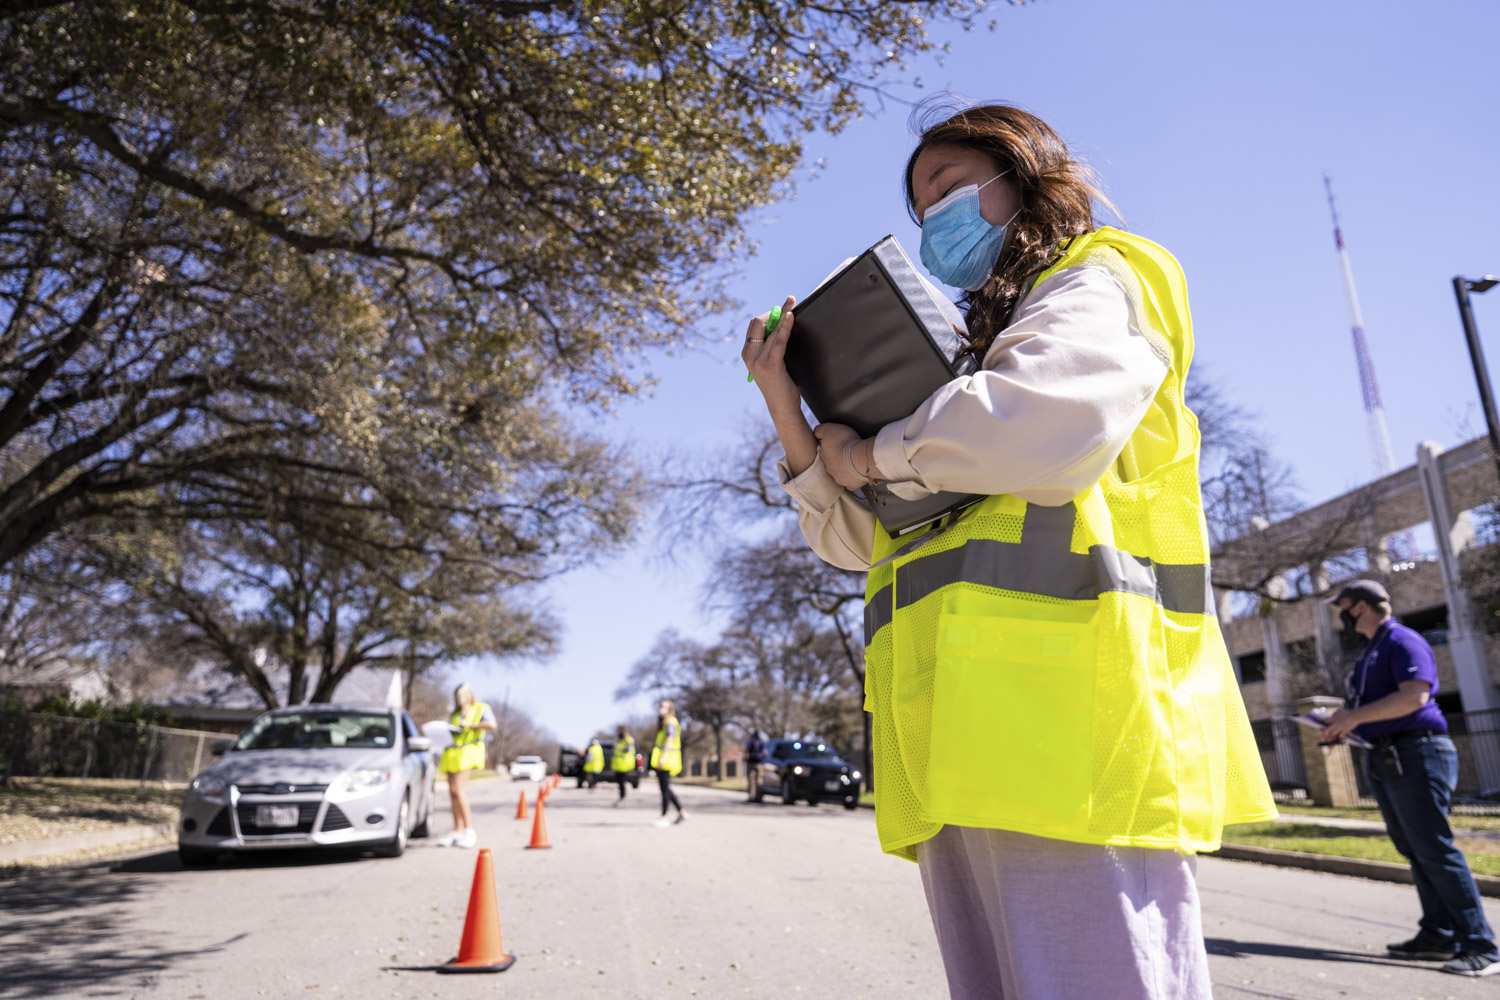 TCU hosted a COVID-19 drive-thru vaccine clinic at the parking lots of the Amon G. Carter Stadium.